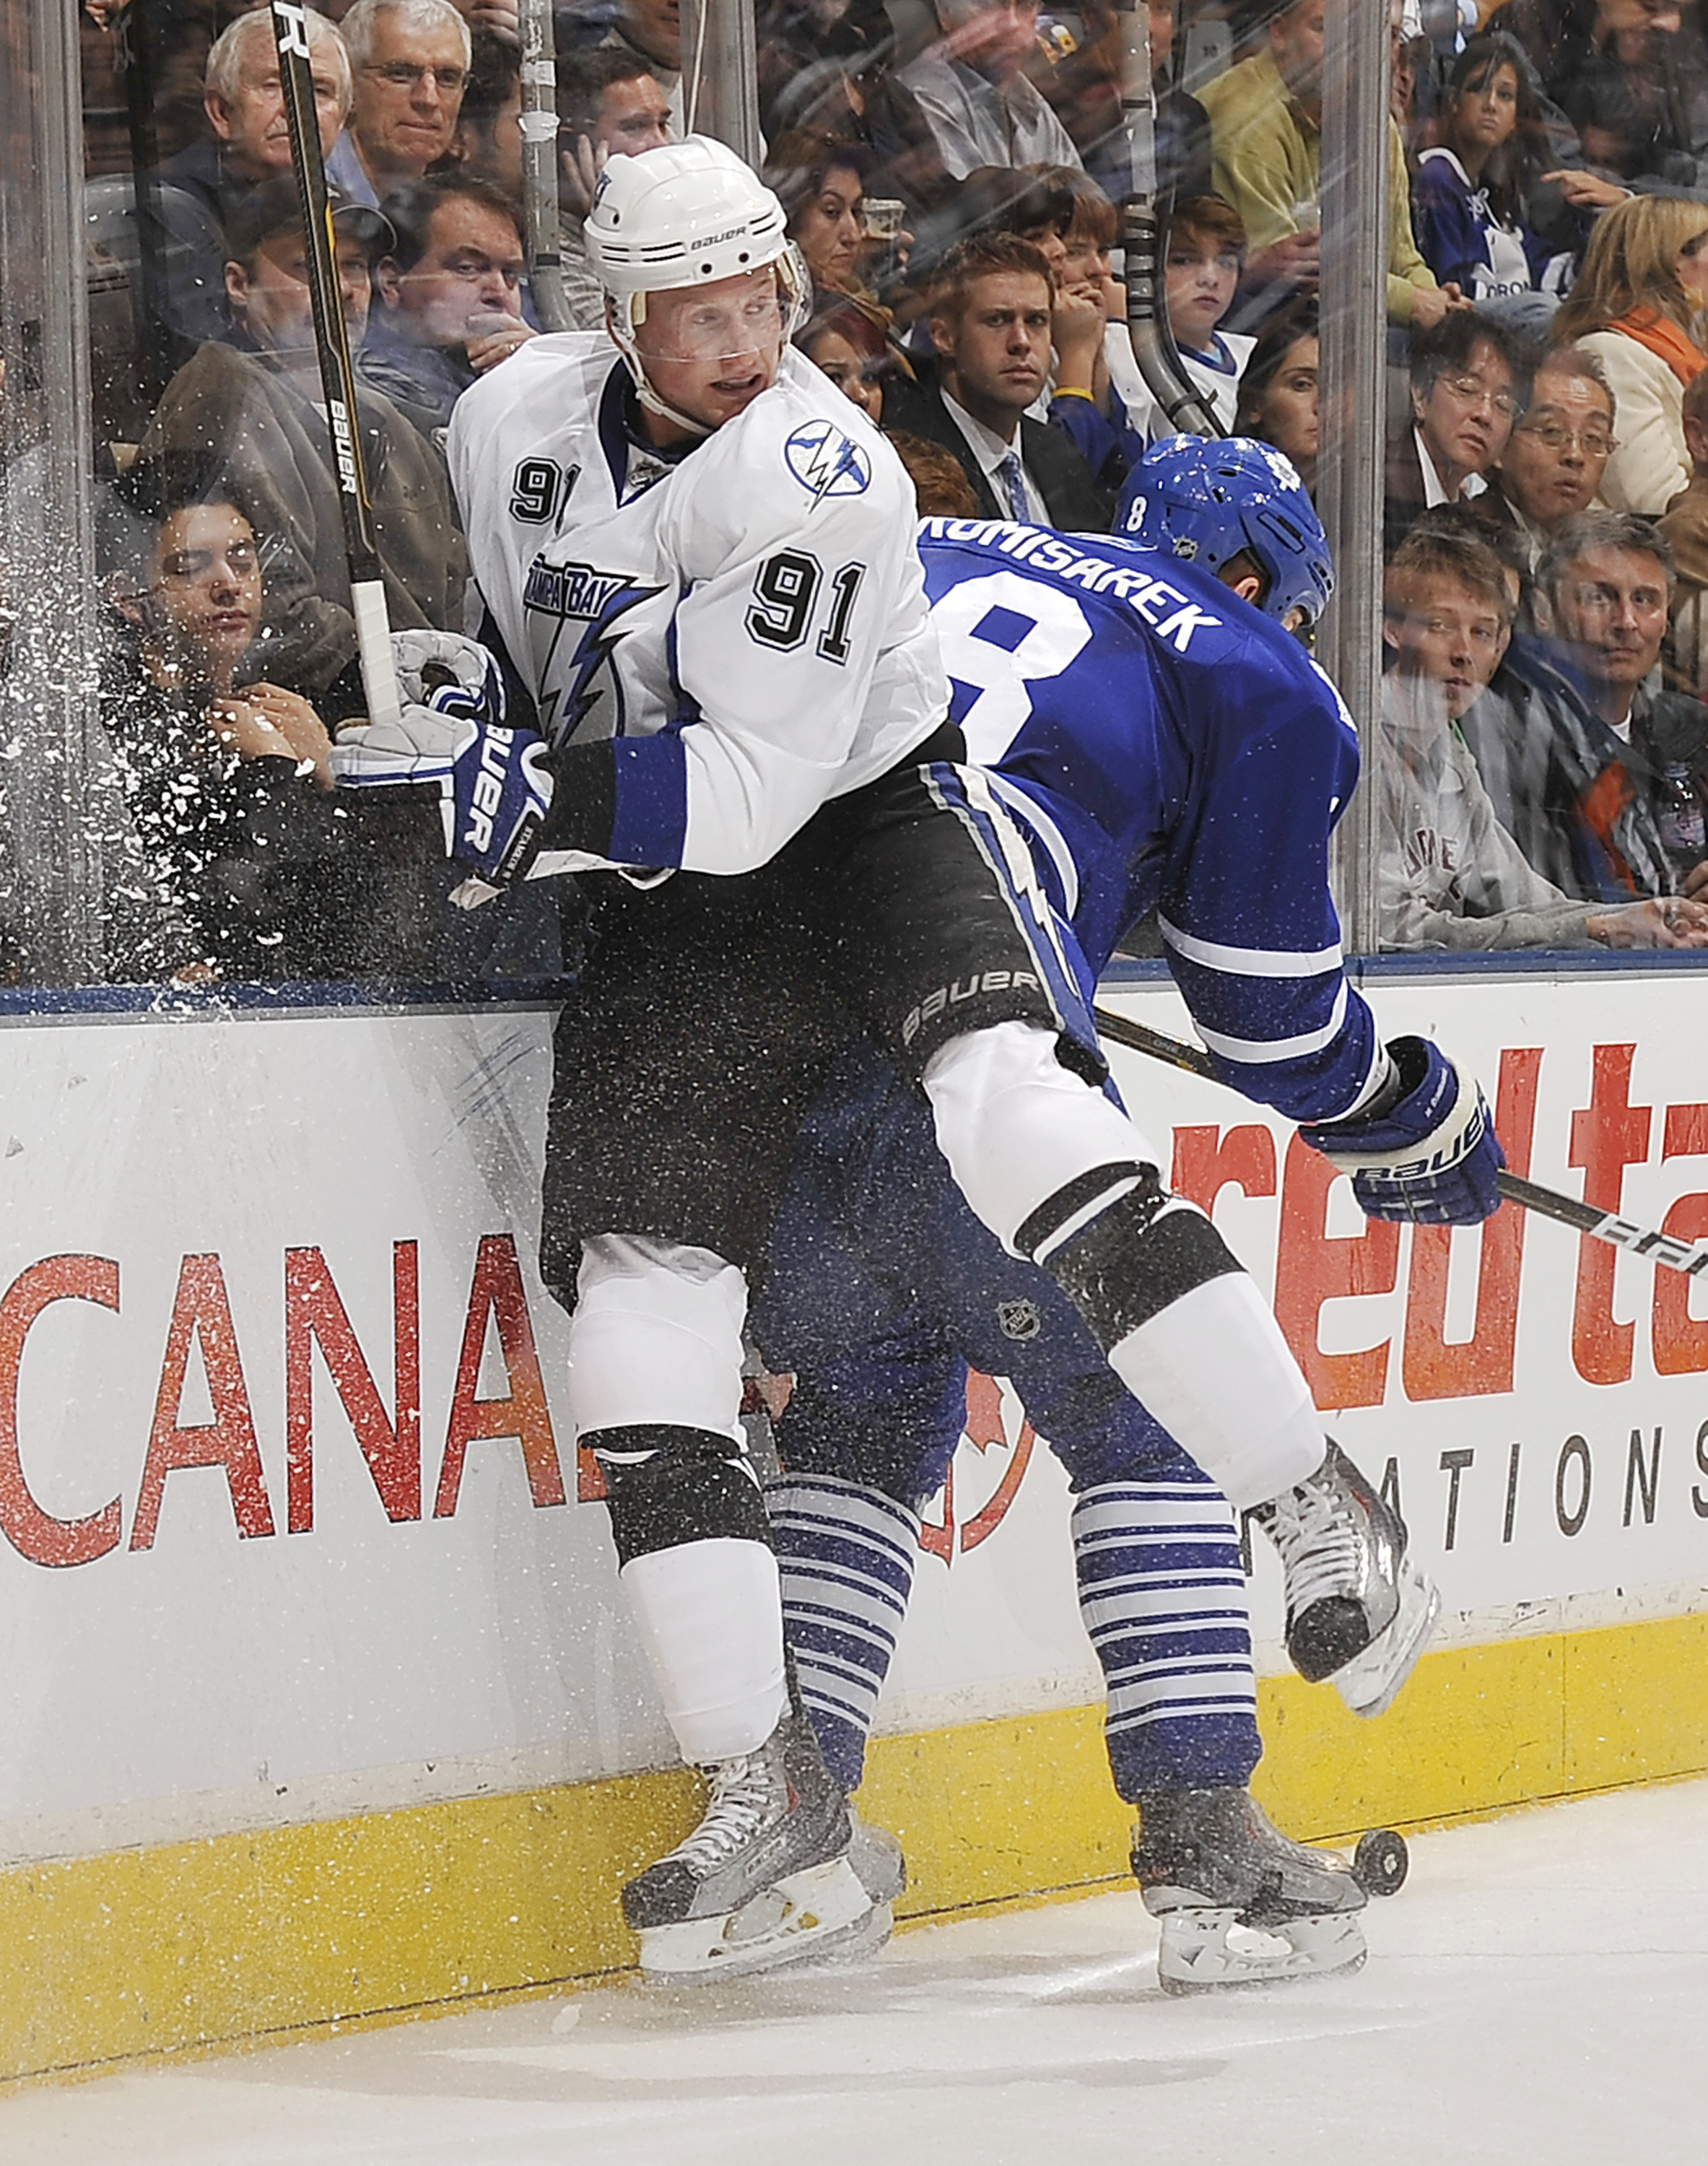 TORONTO, CANADA - NOVEMBER 30:  Steven Stamkos #91 of the Tampa Bay Lightning checks Mike Komisarek #8 of the Toronto Maple Leafs during game action November 30, 2010 at the Air Canada Centre in Toronto, Ontario, Canada. (Photo by Abelimages/Getty Images)